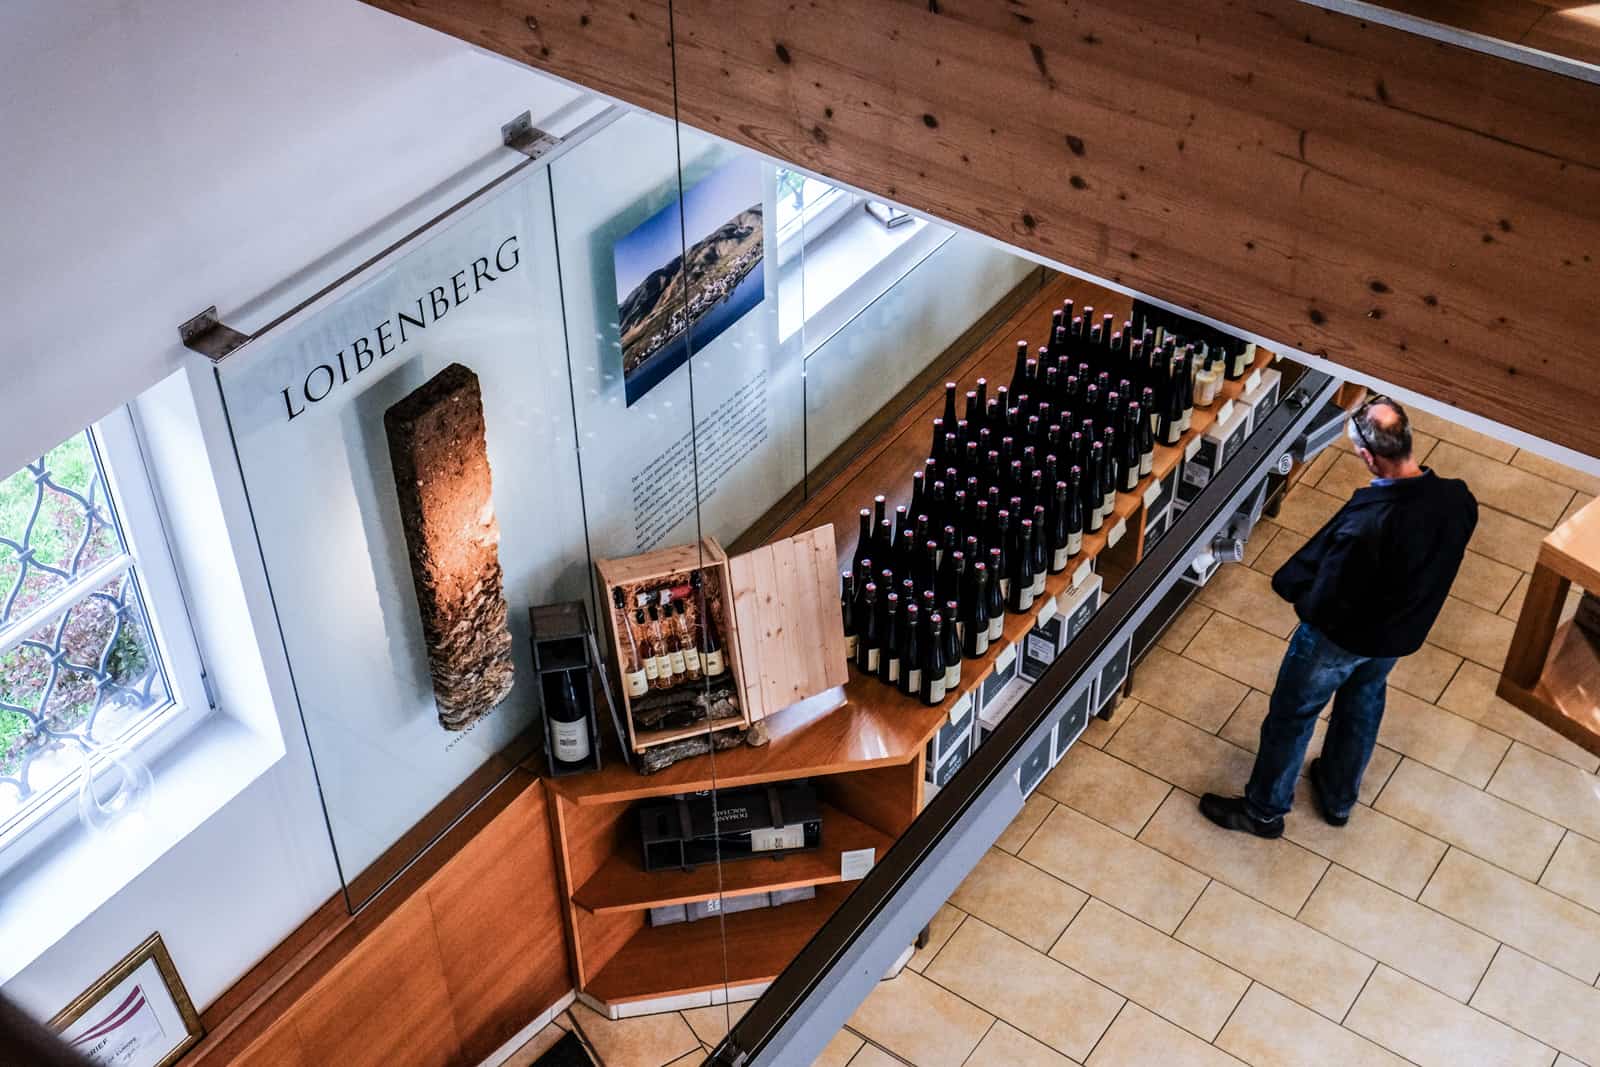 An elevated view of a man shopping rows of wine bottles at the Domäne Wachau winery shop